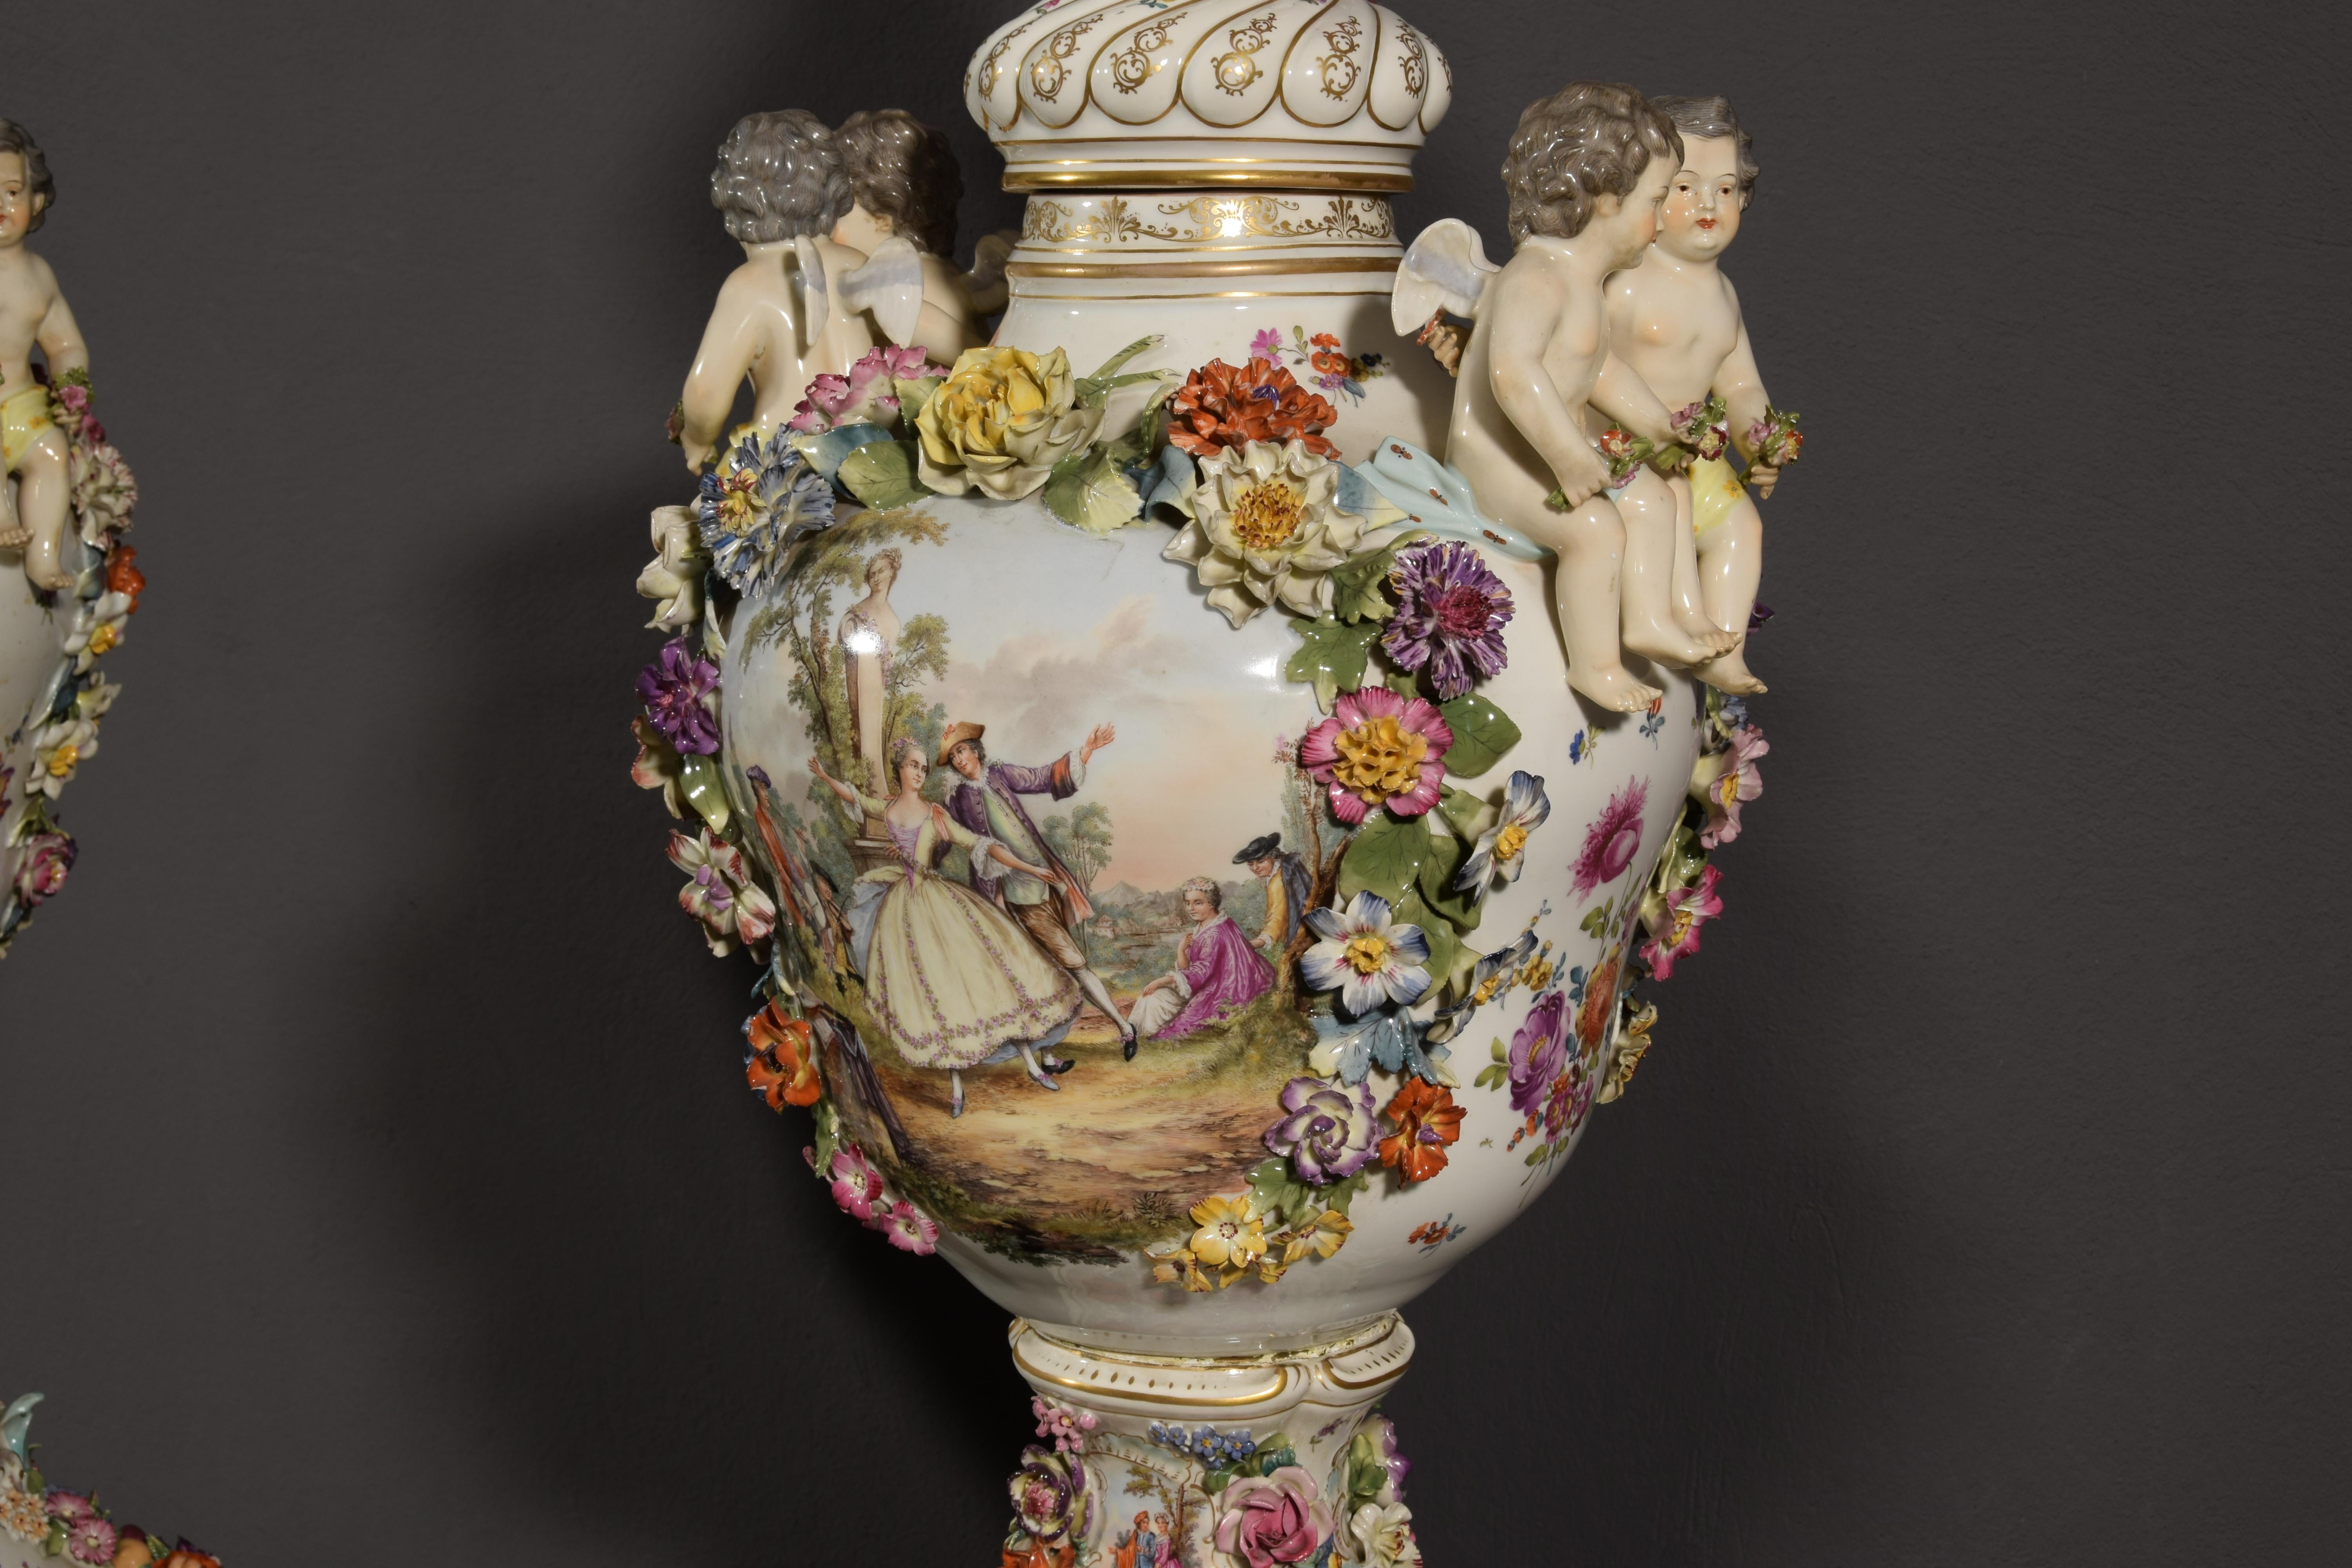 19th Century Pair of German Polychrome Porcelain Vases For Sale 14